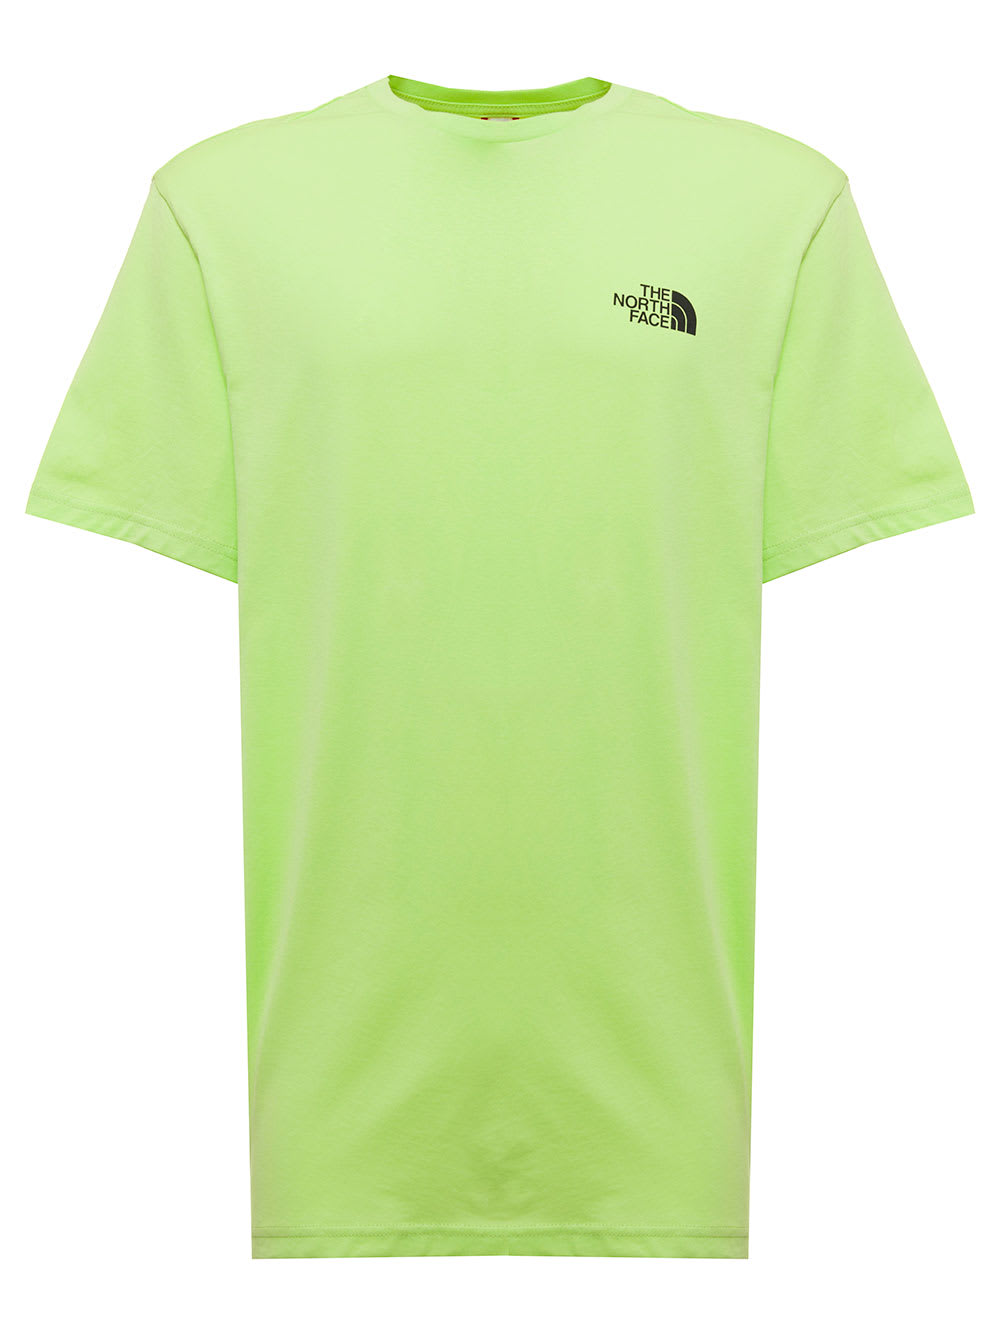 The North Face Mens Fluo Green Cotton T-shirt With Logo Print